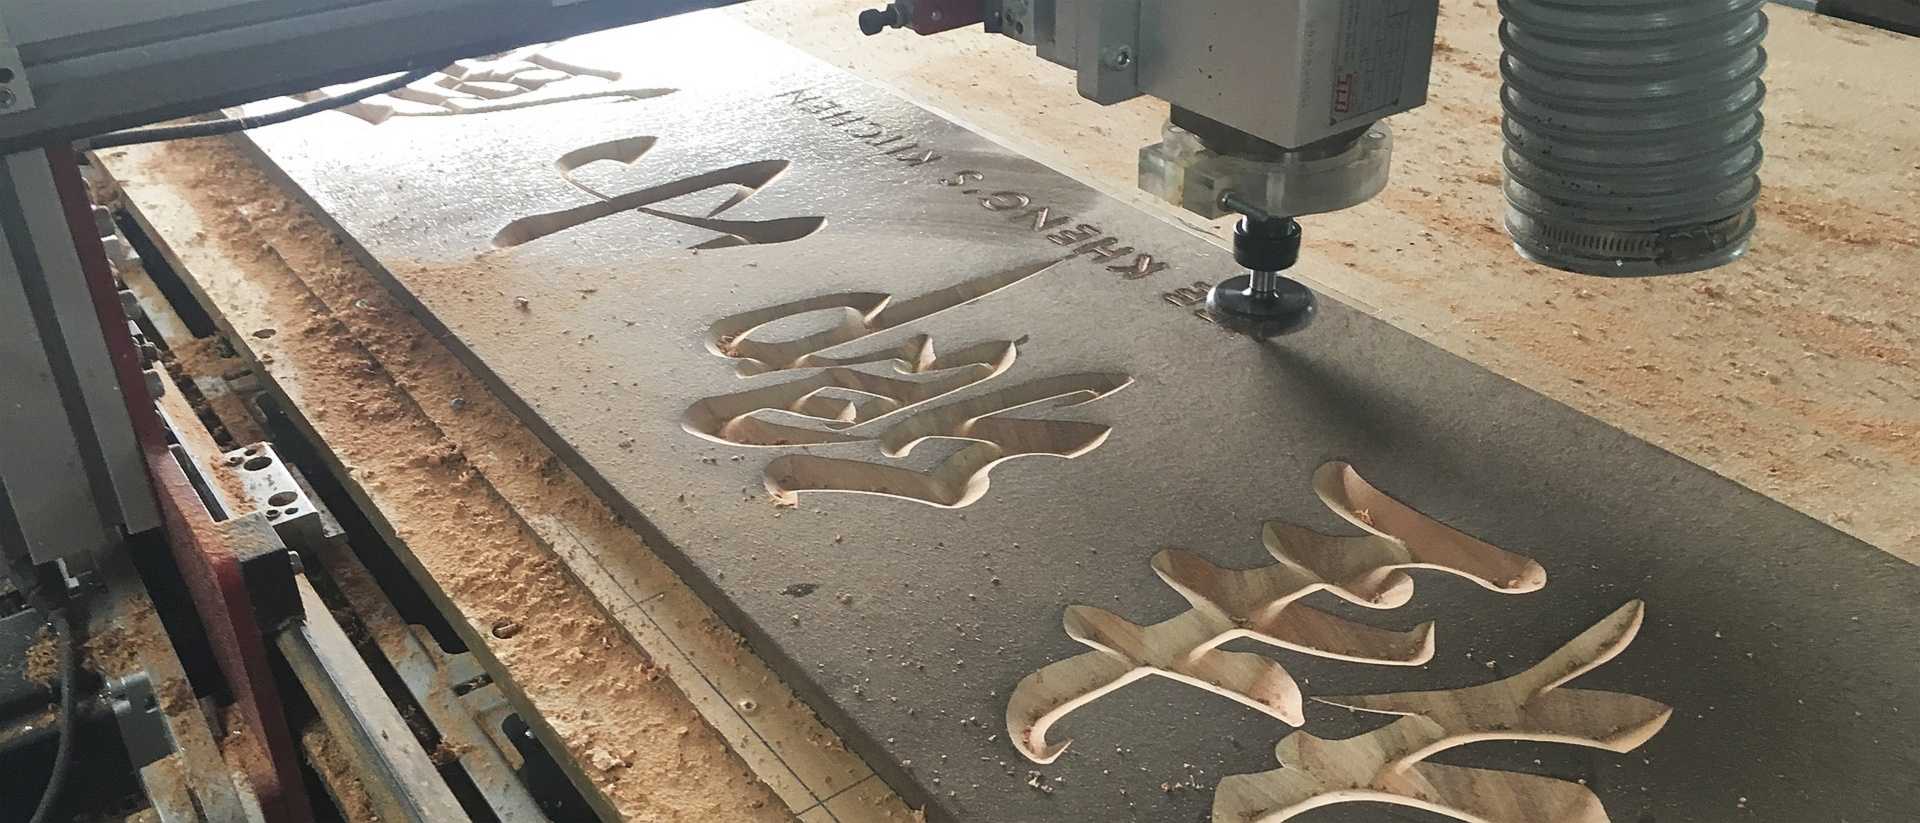 CNC wooden sign engraving example